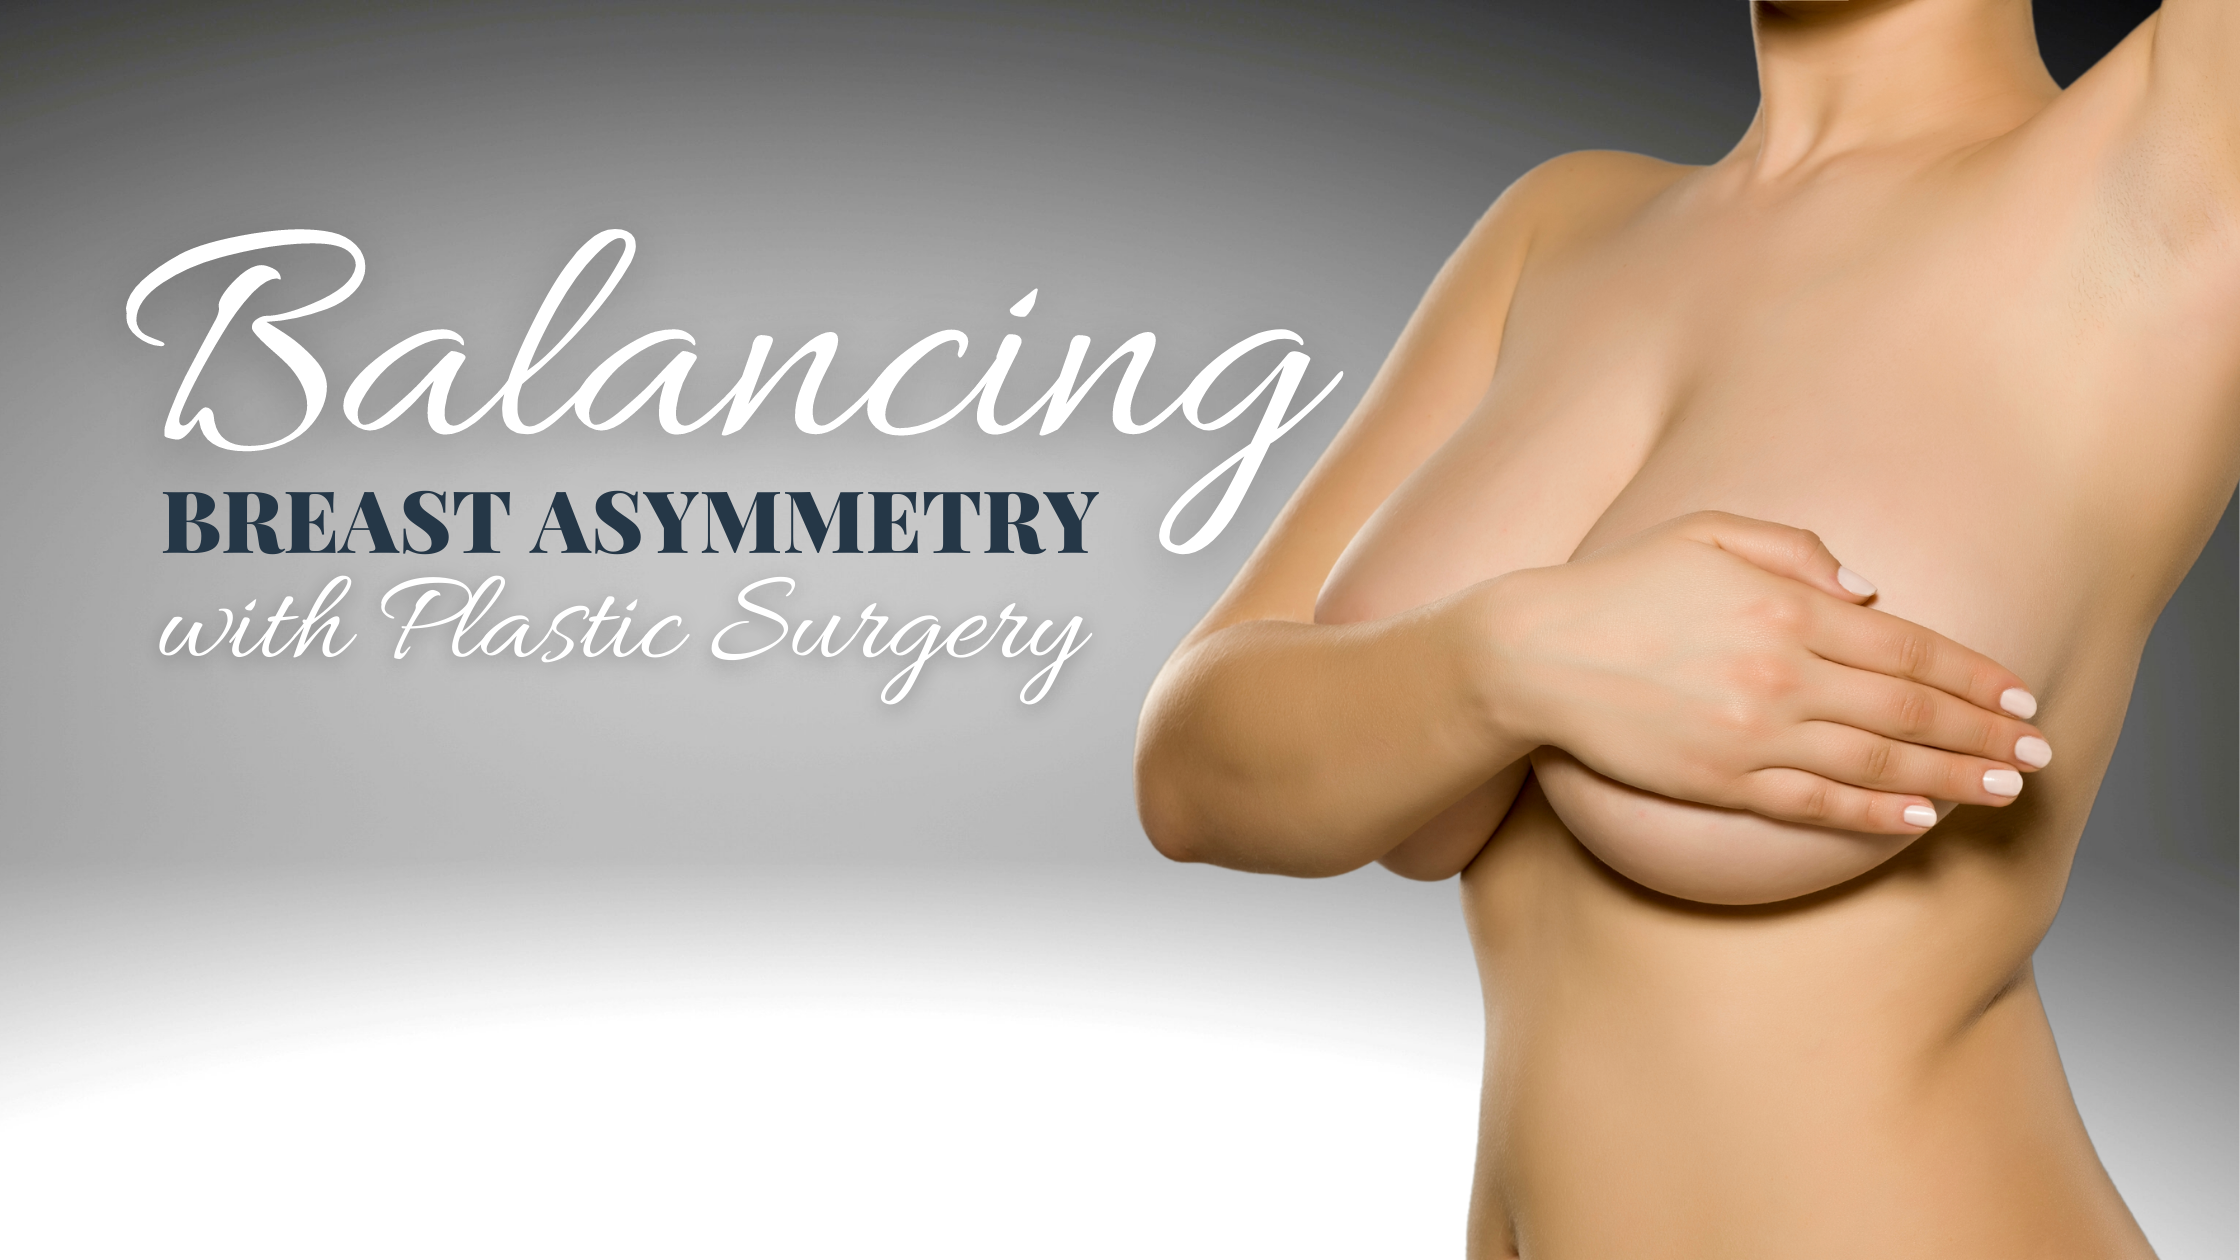 Sheri on X: We can fix the appearance of uneven breasts even in your  snuggest T-shirt or swimwear by using partial prosthesis specially designed  to balance out asymmetrical breasts. #tsmastectomy #prostheses #symmetry #